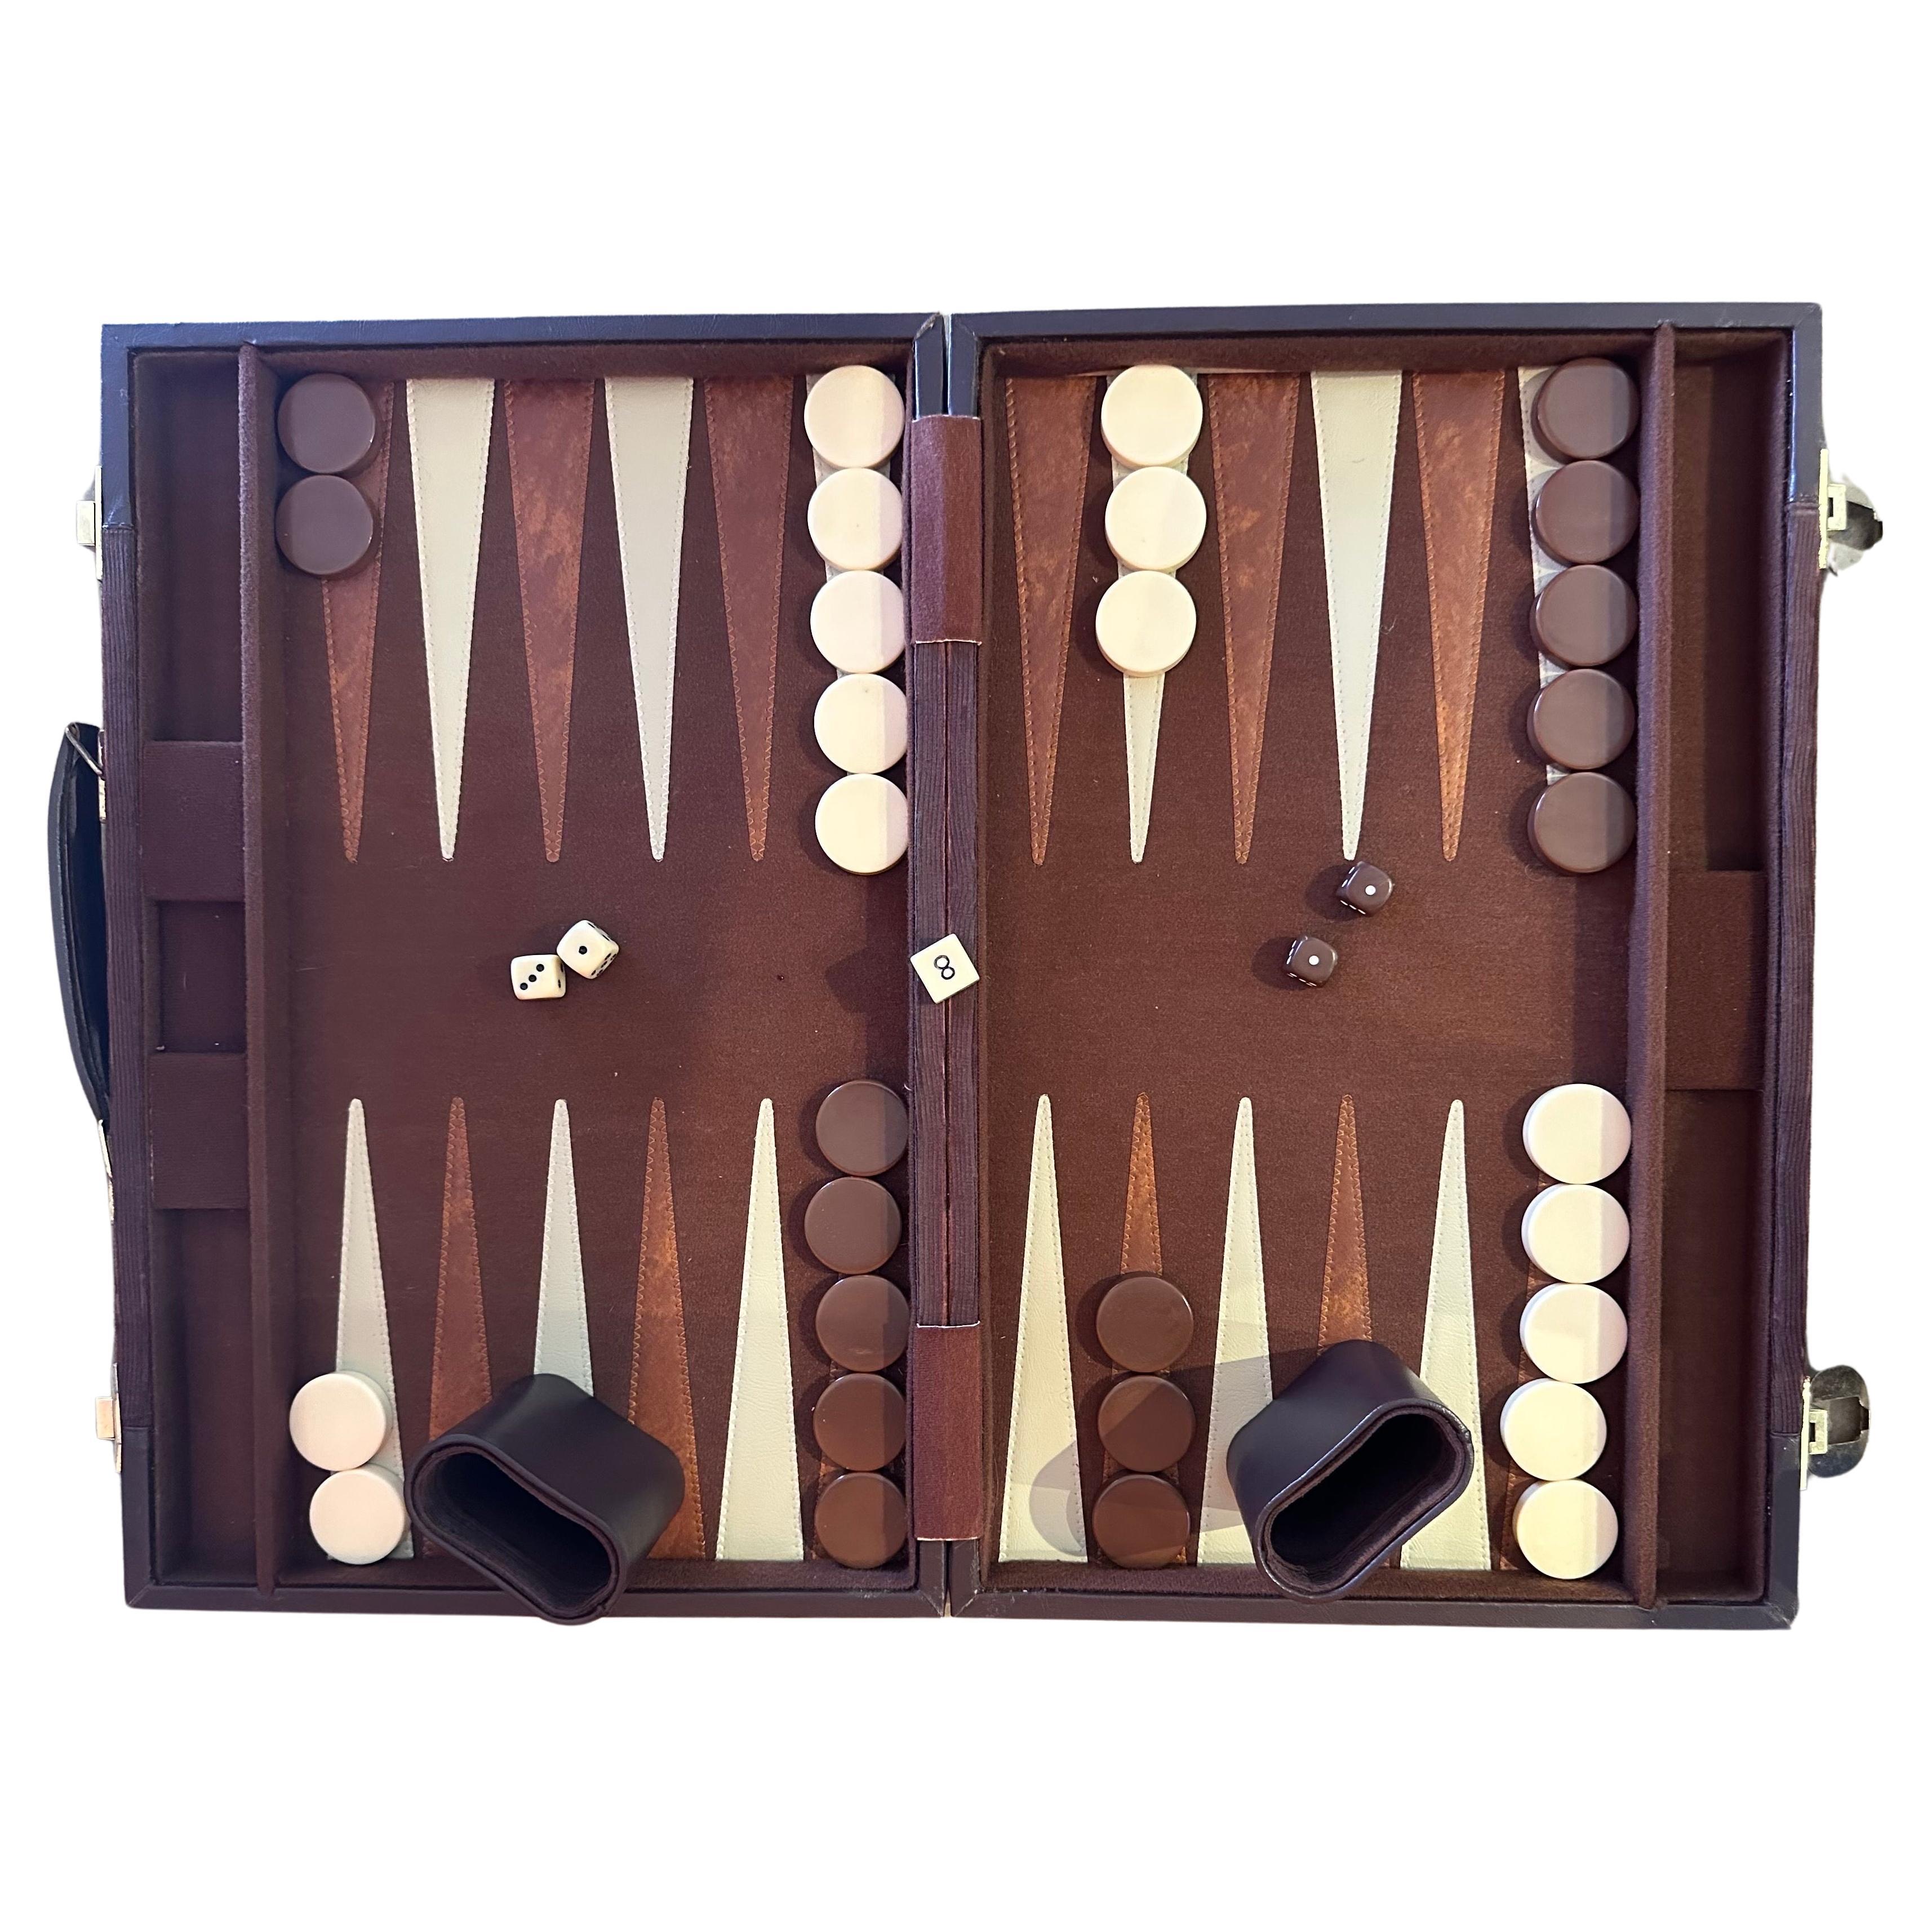 Vintage corduroy and bakelite backgammon set, circa 1970s. Set is complete with a foldable case / board with brown corduroy fabric, 30 bakelite checkers (cream and brown in color, 1.25